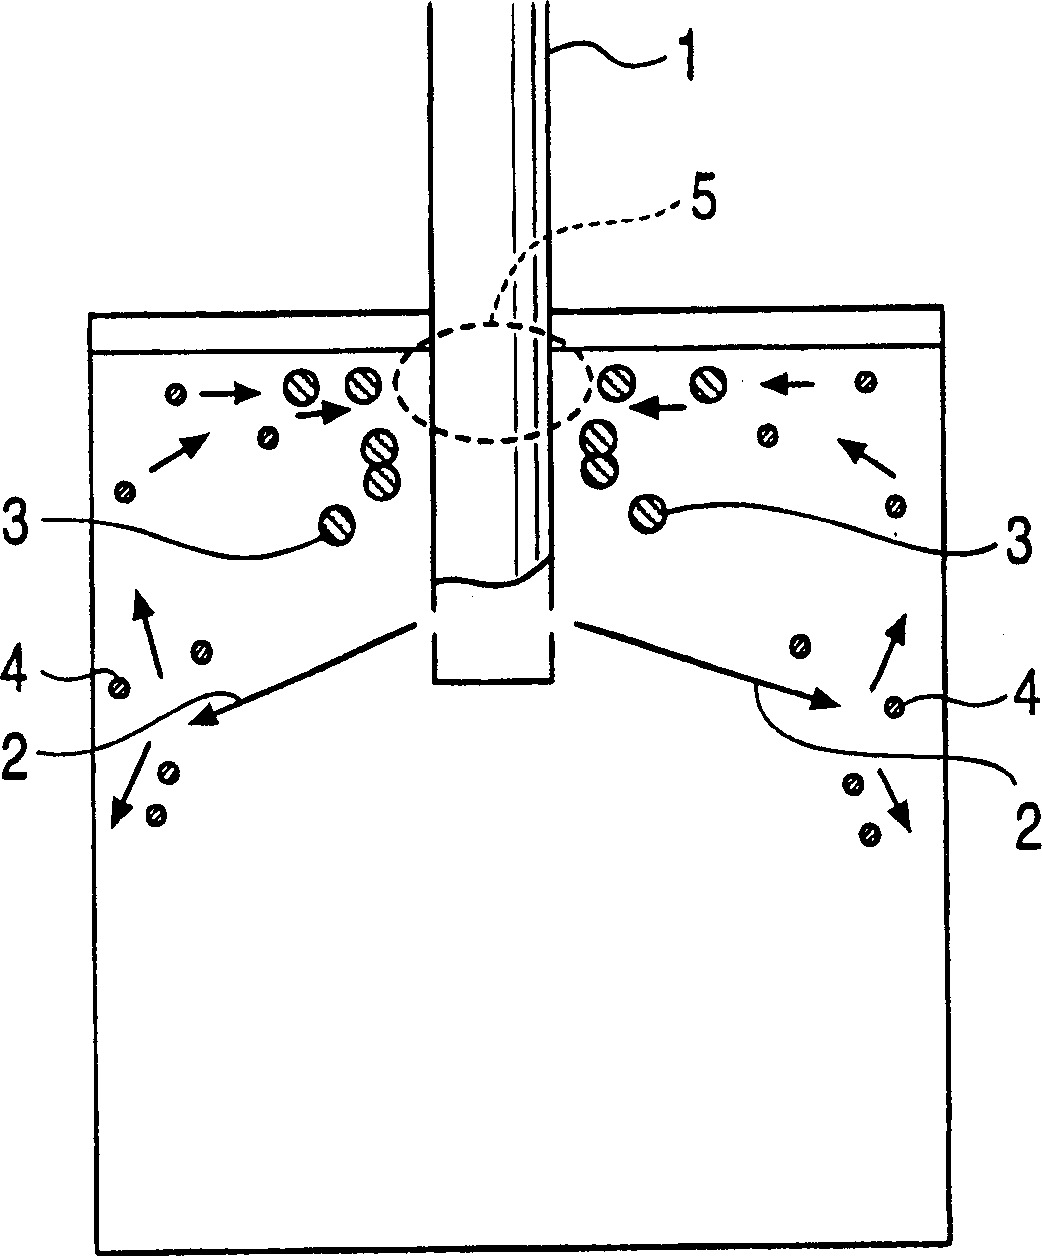 Method and apparatus for continuous casting of metals